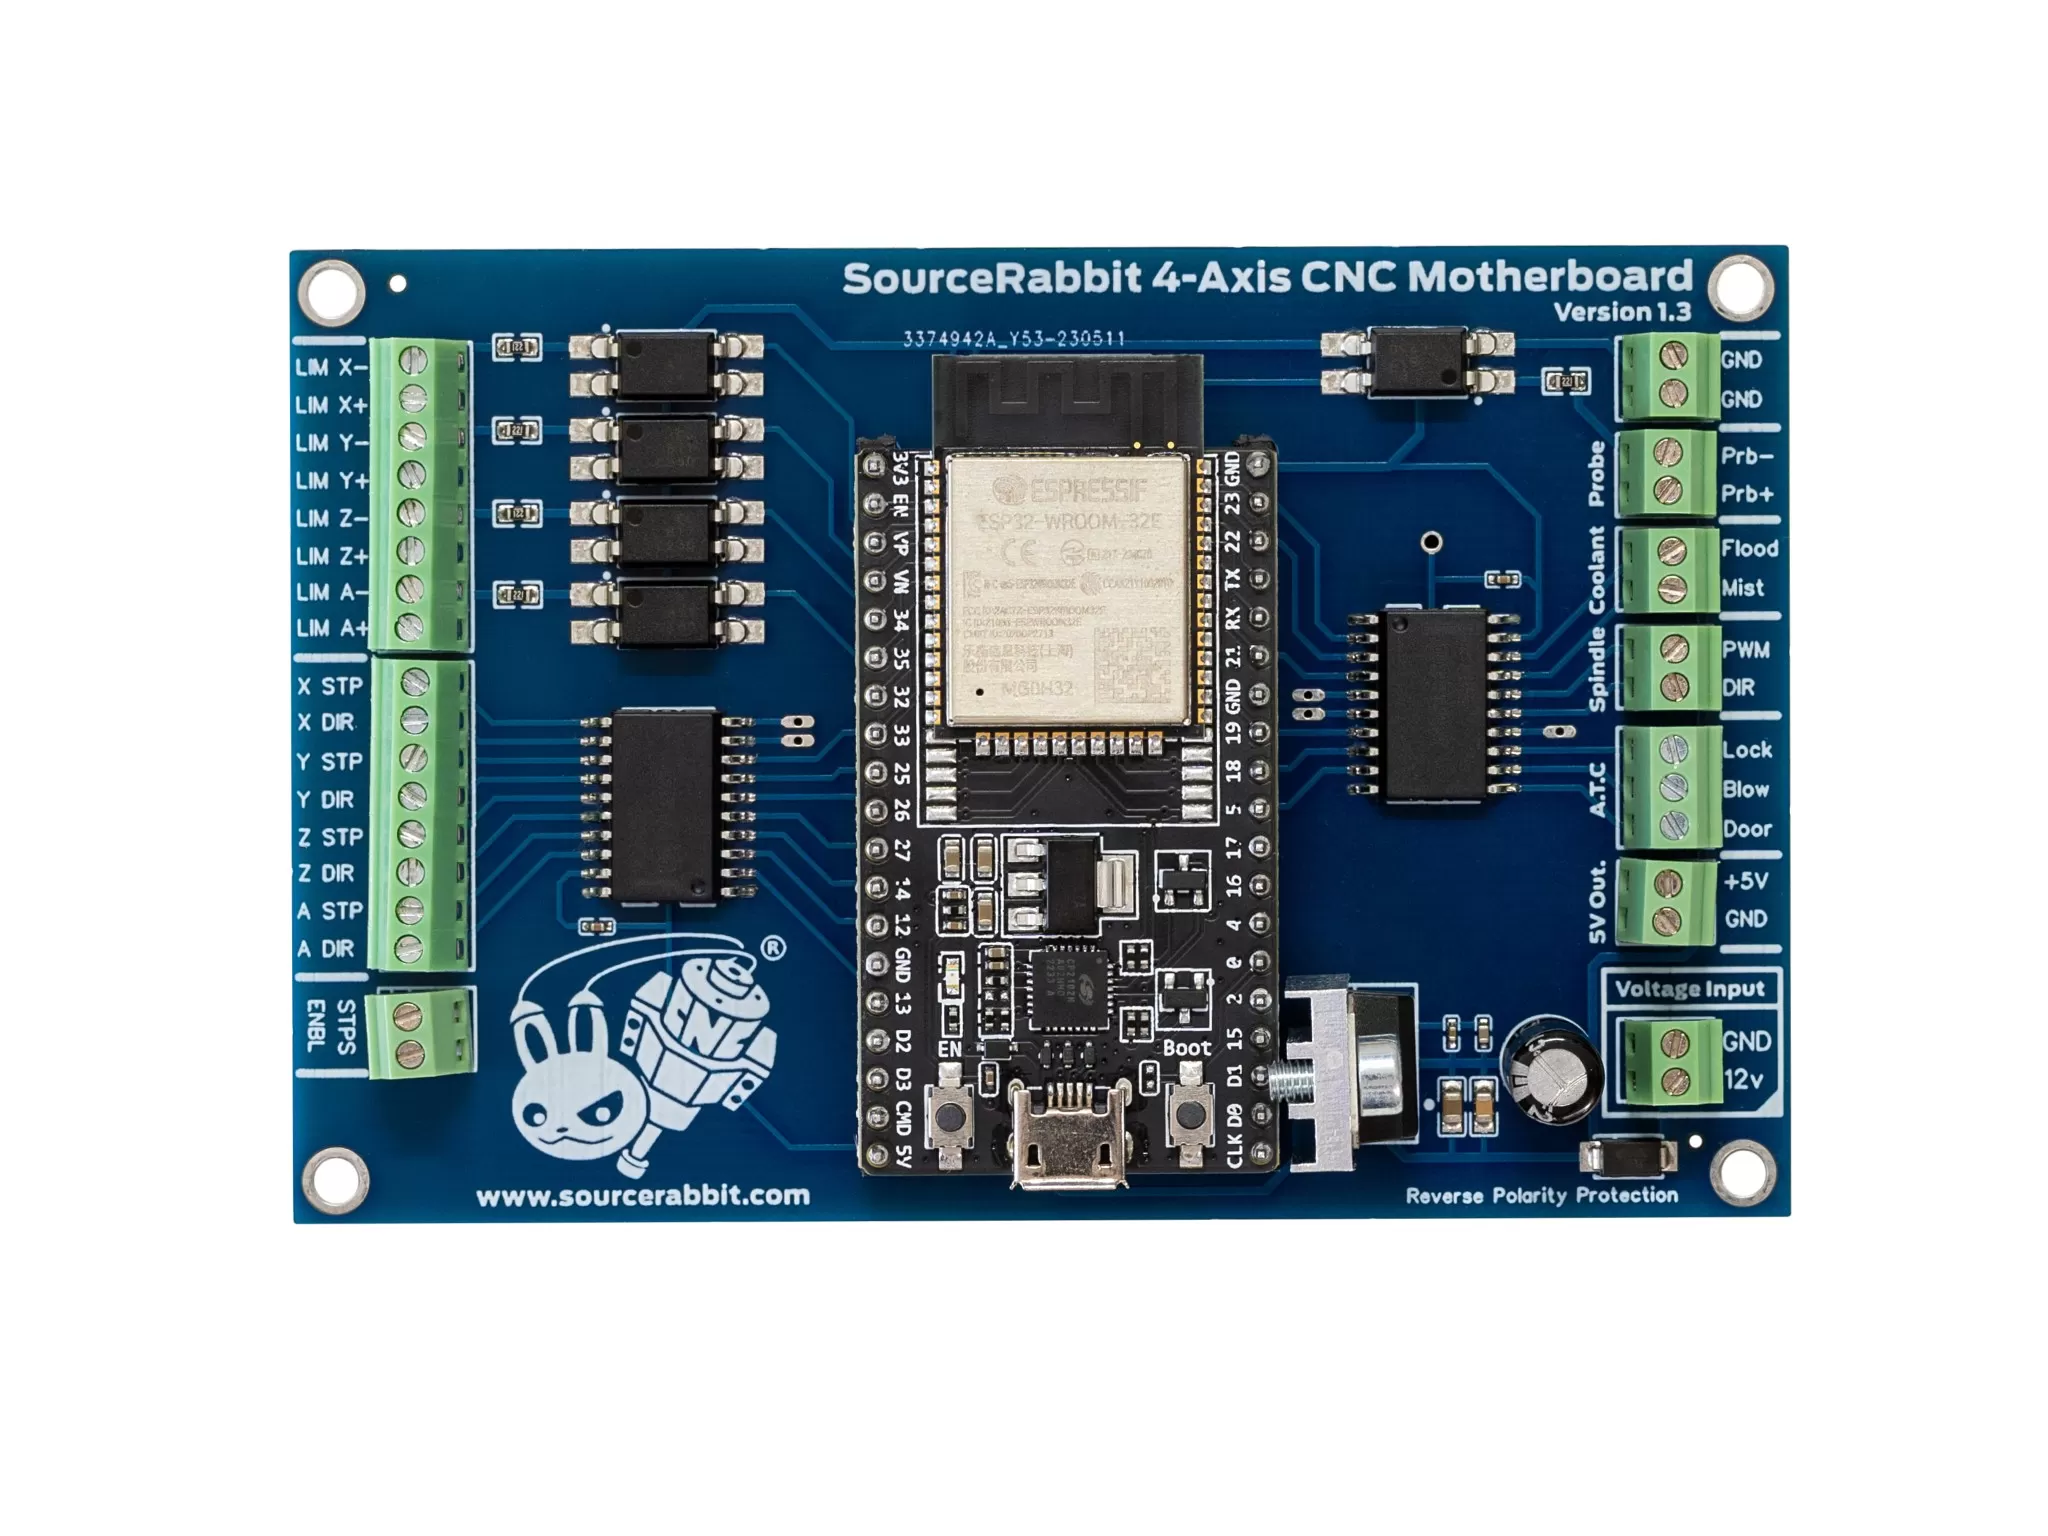 4-Axis CNC Motherboard v1.3 view 0